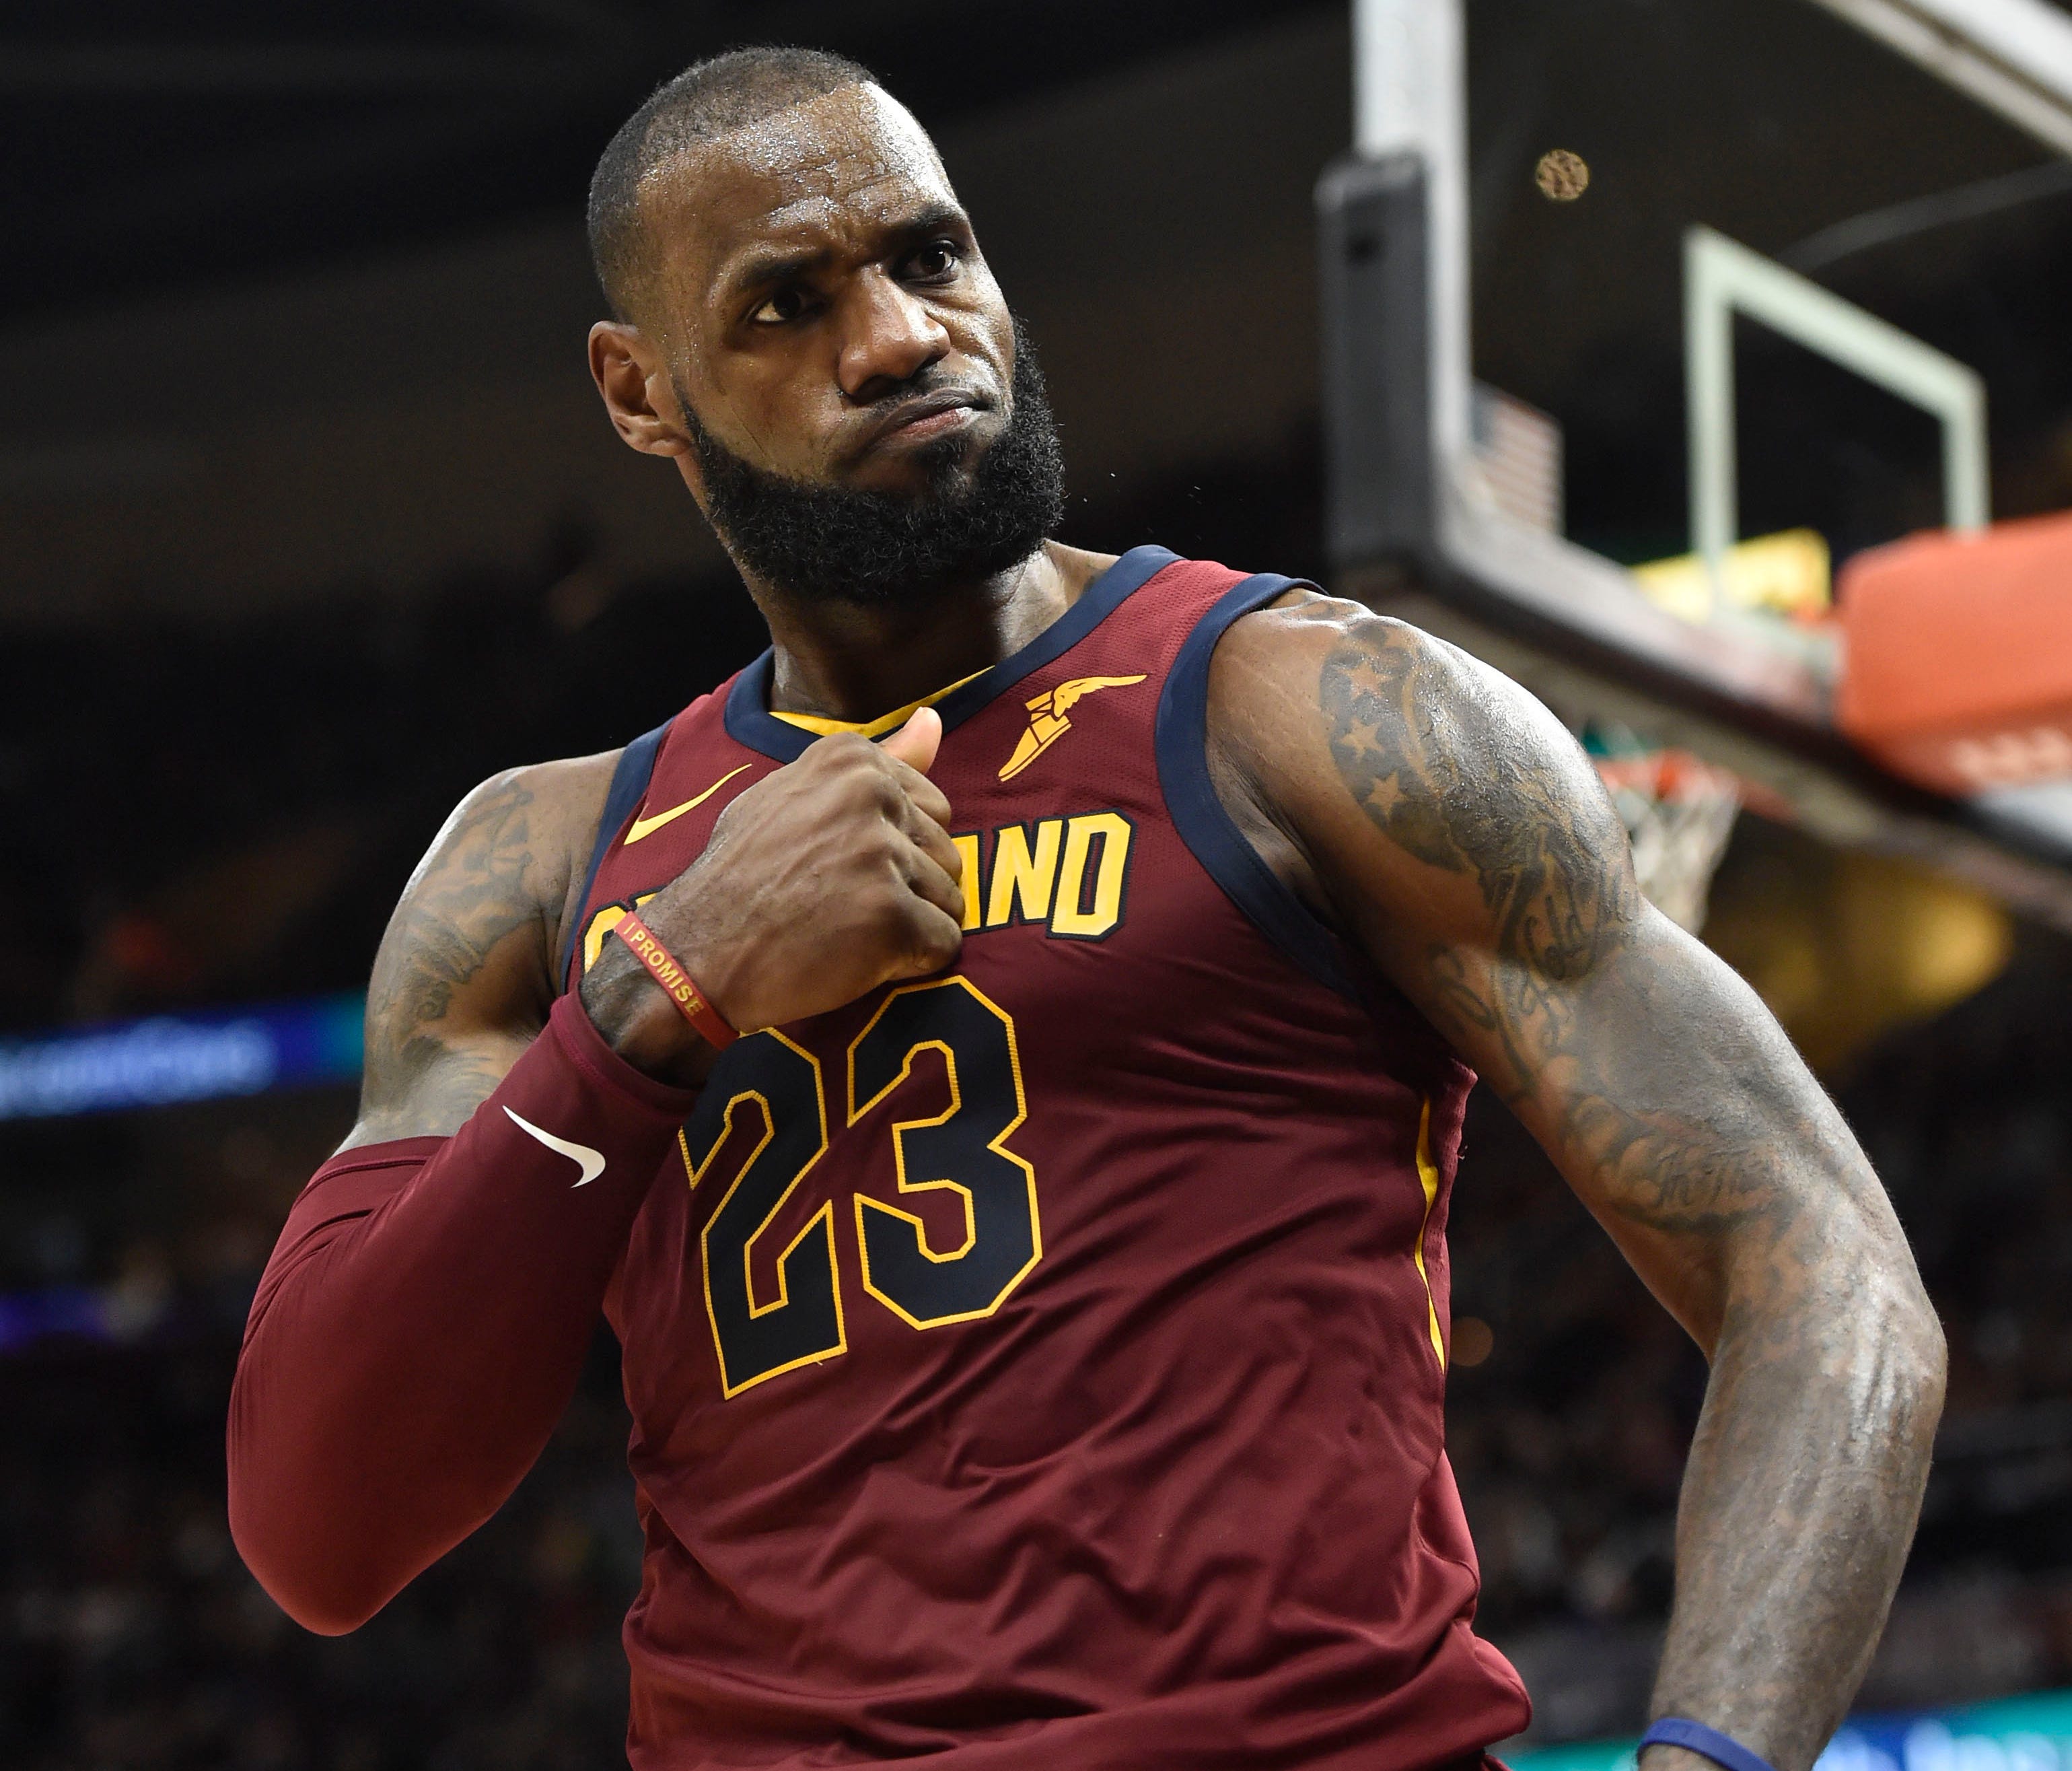 Cleveland Cavaliers forward LeBron James (23) reacts after a basket in the fourth quarter against the Indiana Pacers at Quicken Loans Arena.